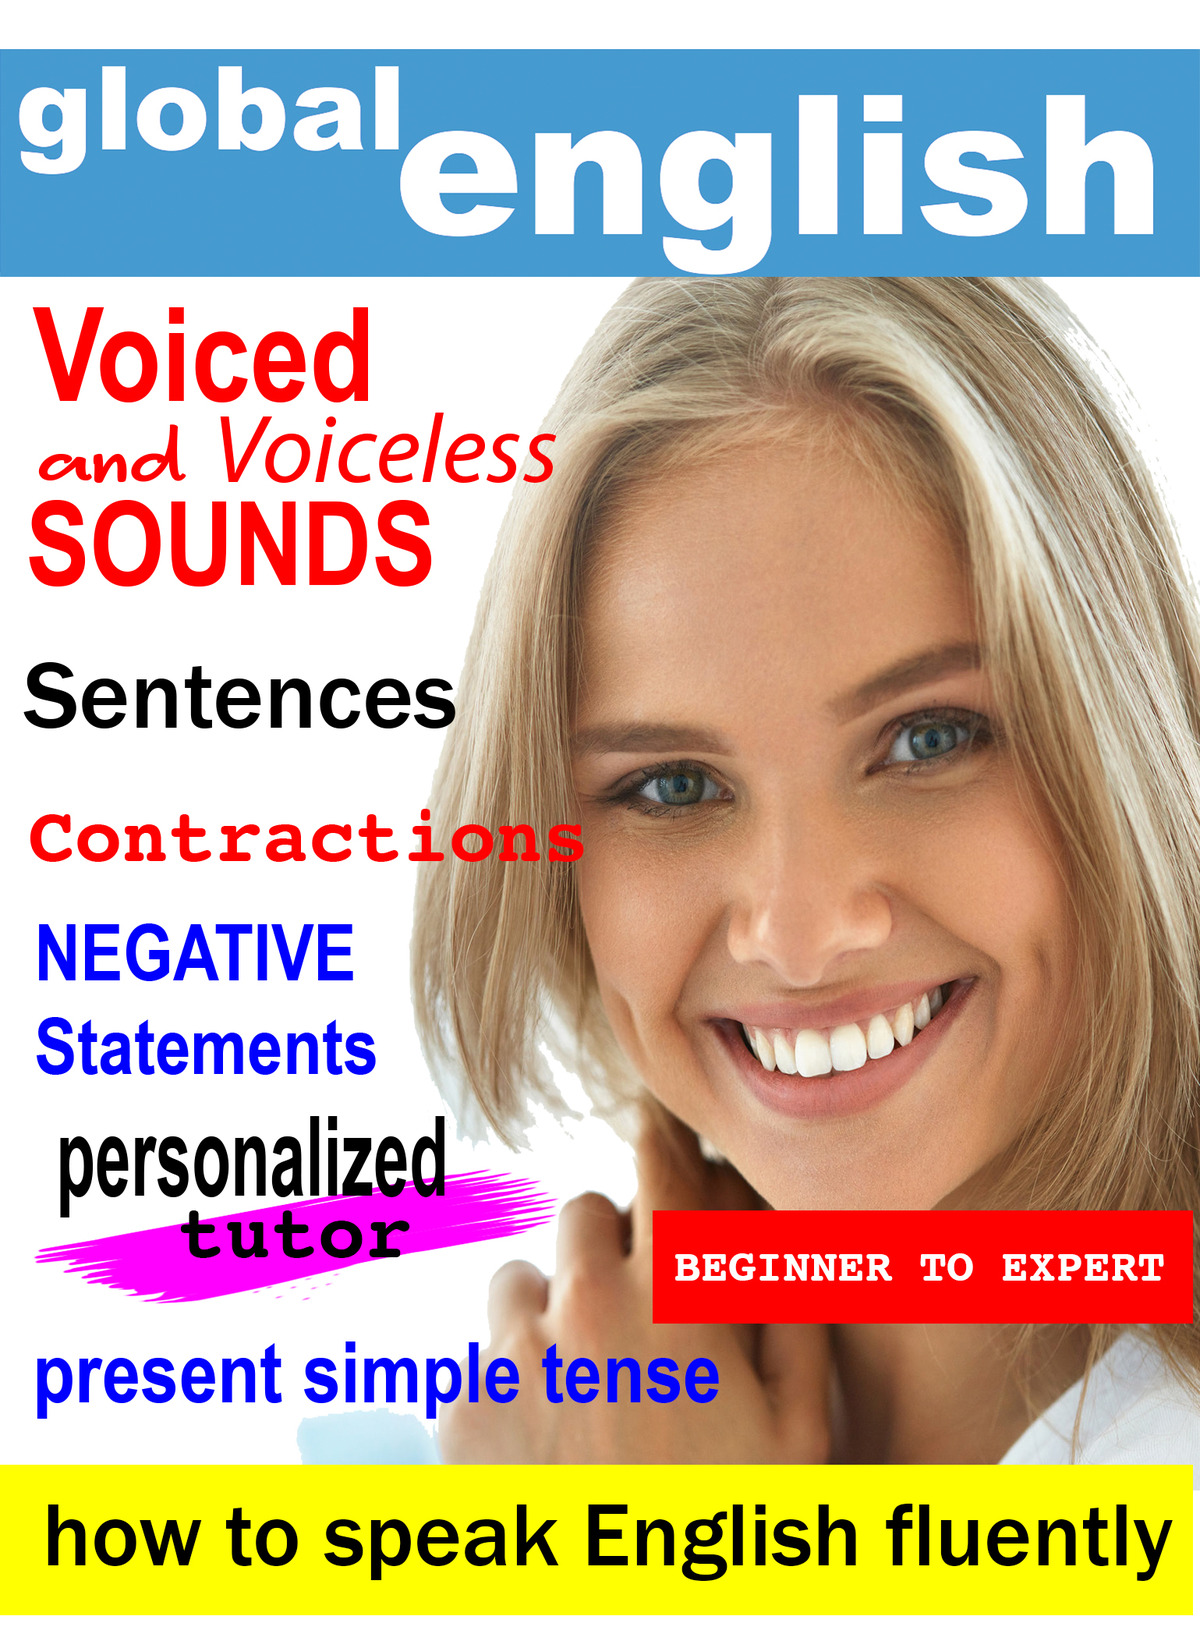 K7003 - Present Simple Tense Sentence Forms, Contractions, Pronunciation (Voiced and Voiceless Sounds), Words Endings